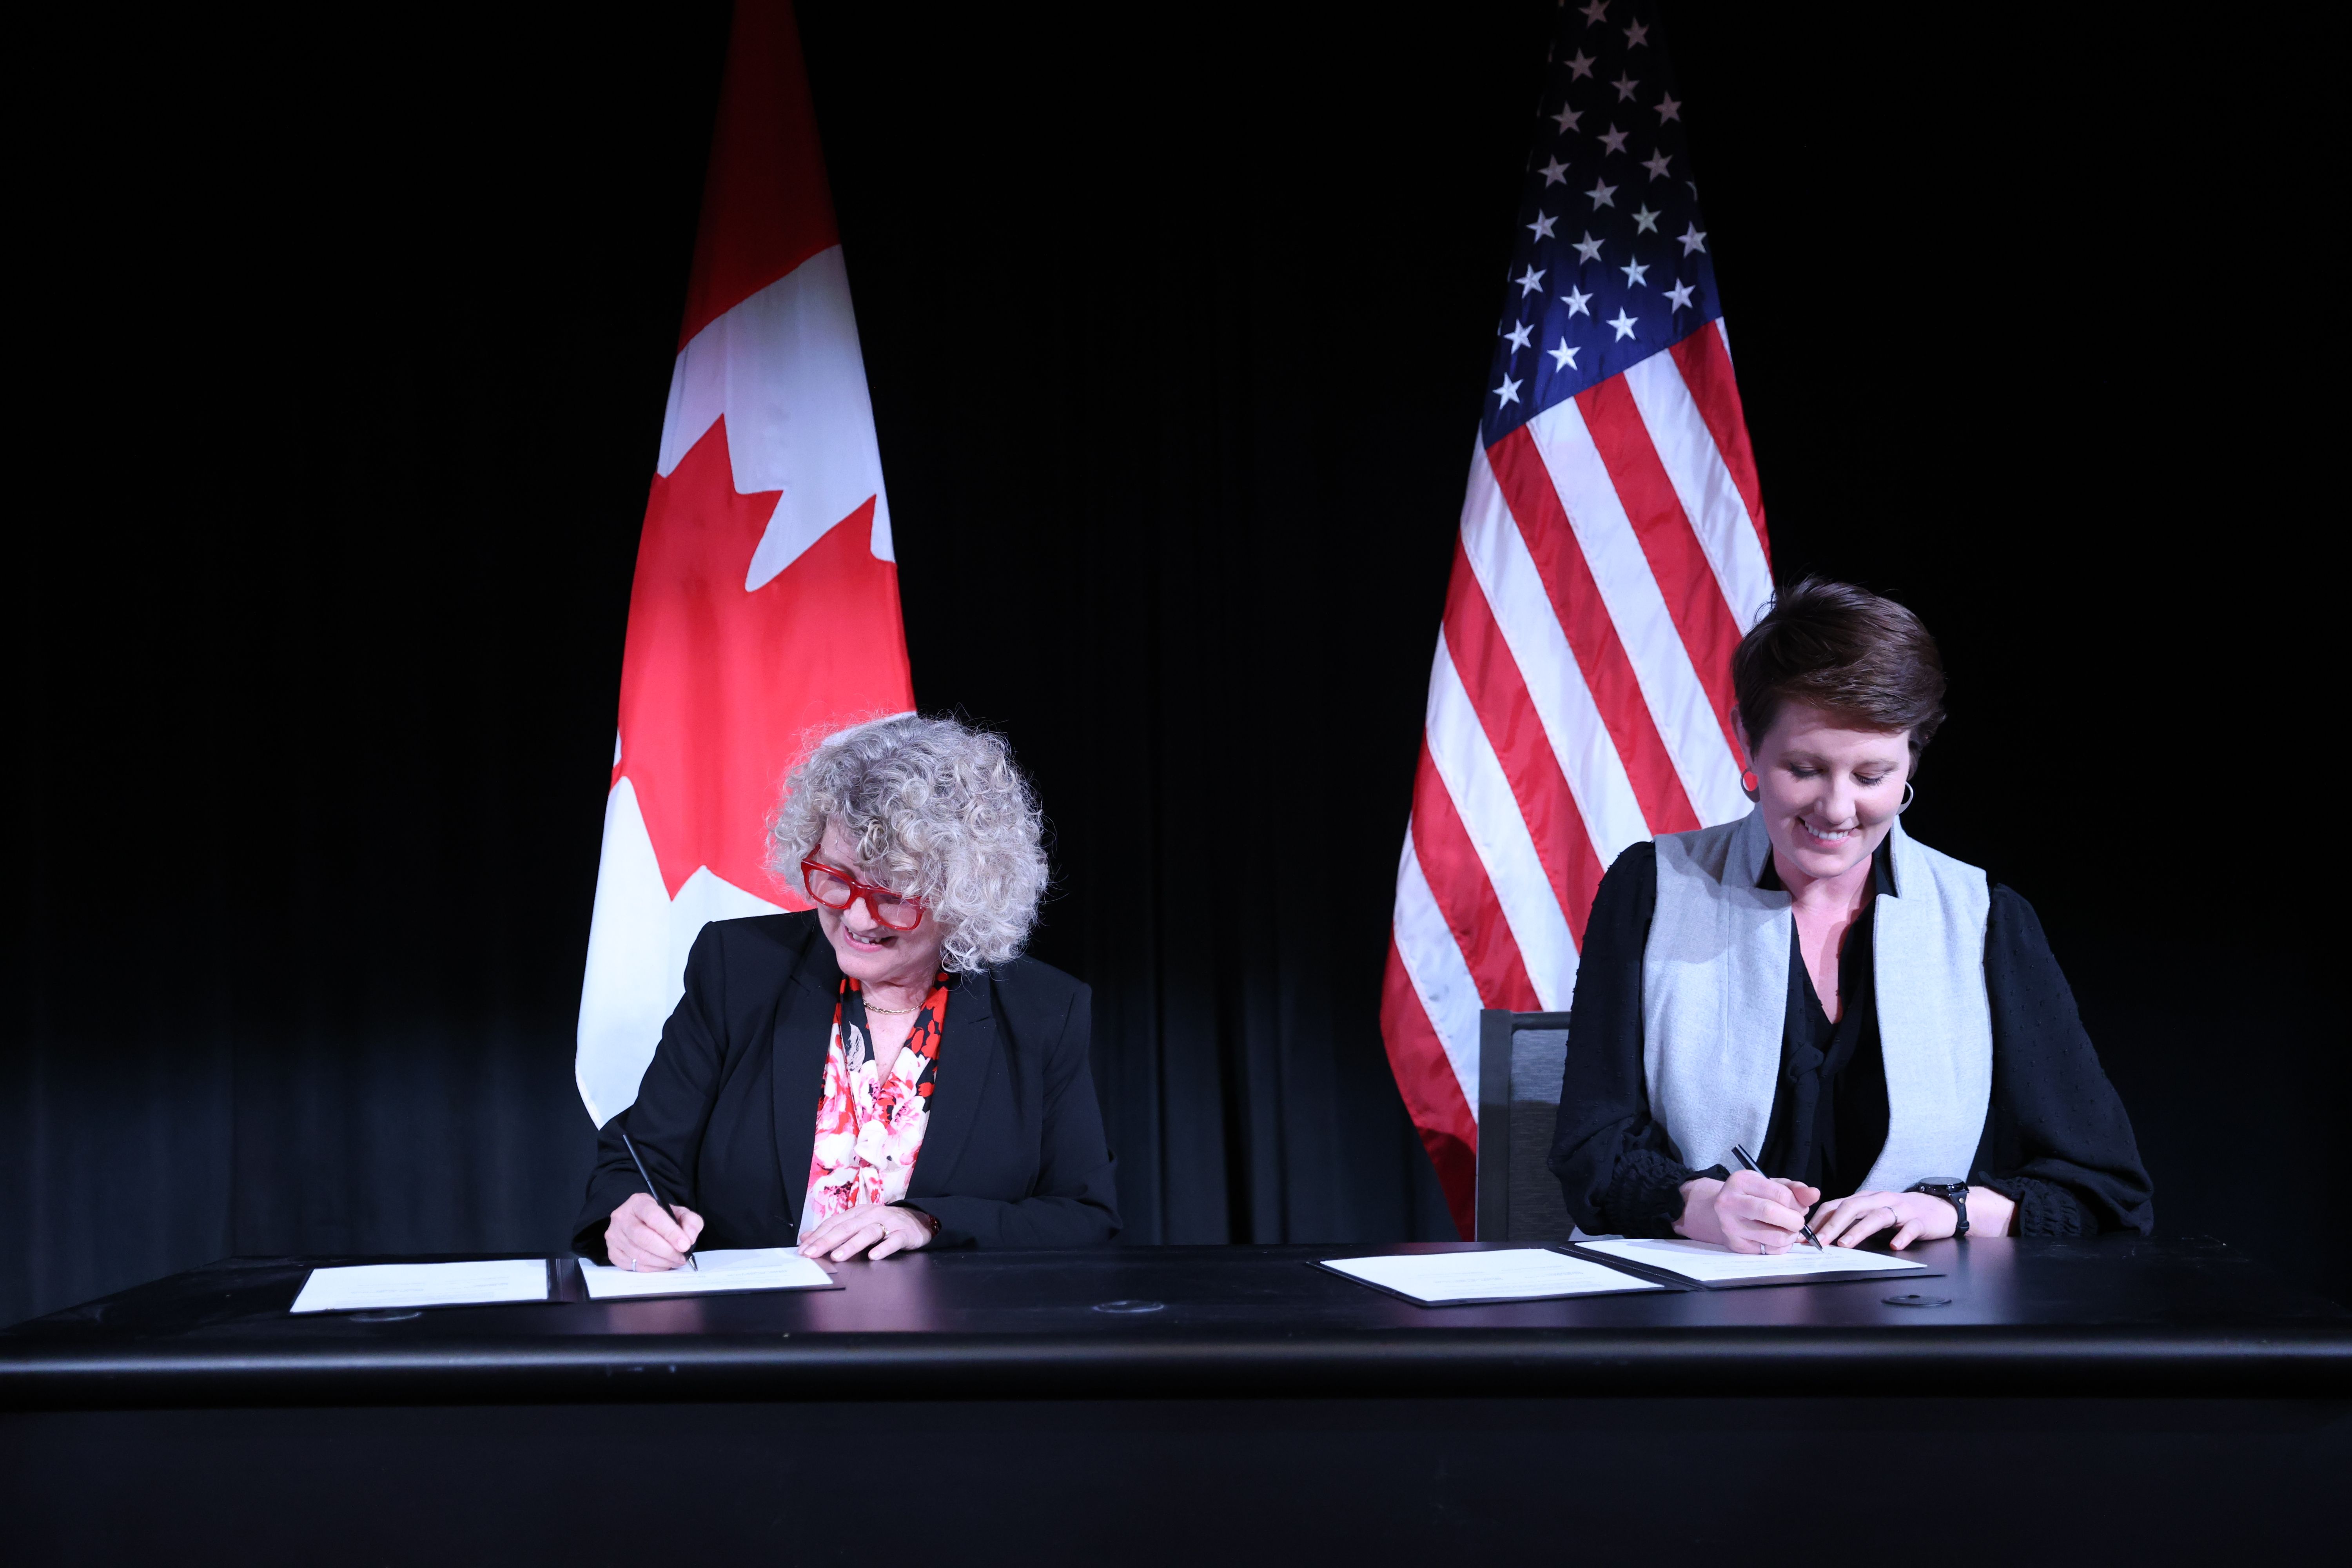 At Canada’s Embassy in Washington, Laurie Swami, President and CEO of the Nuclear Waste Management Organization (left) and Dr. Kathryn Huff, Assistant Secretary for Nuclear Energy at the U.S. Department of Energy (right), sign a Statement of Intent to Co-operate on Used Nuclear Fuel Management.